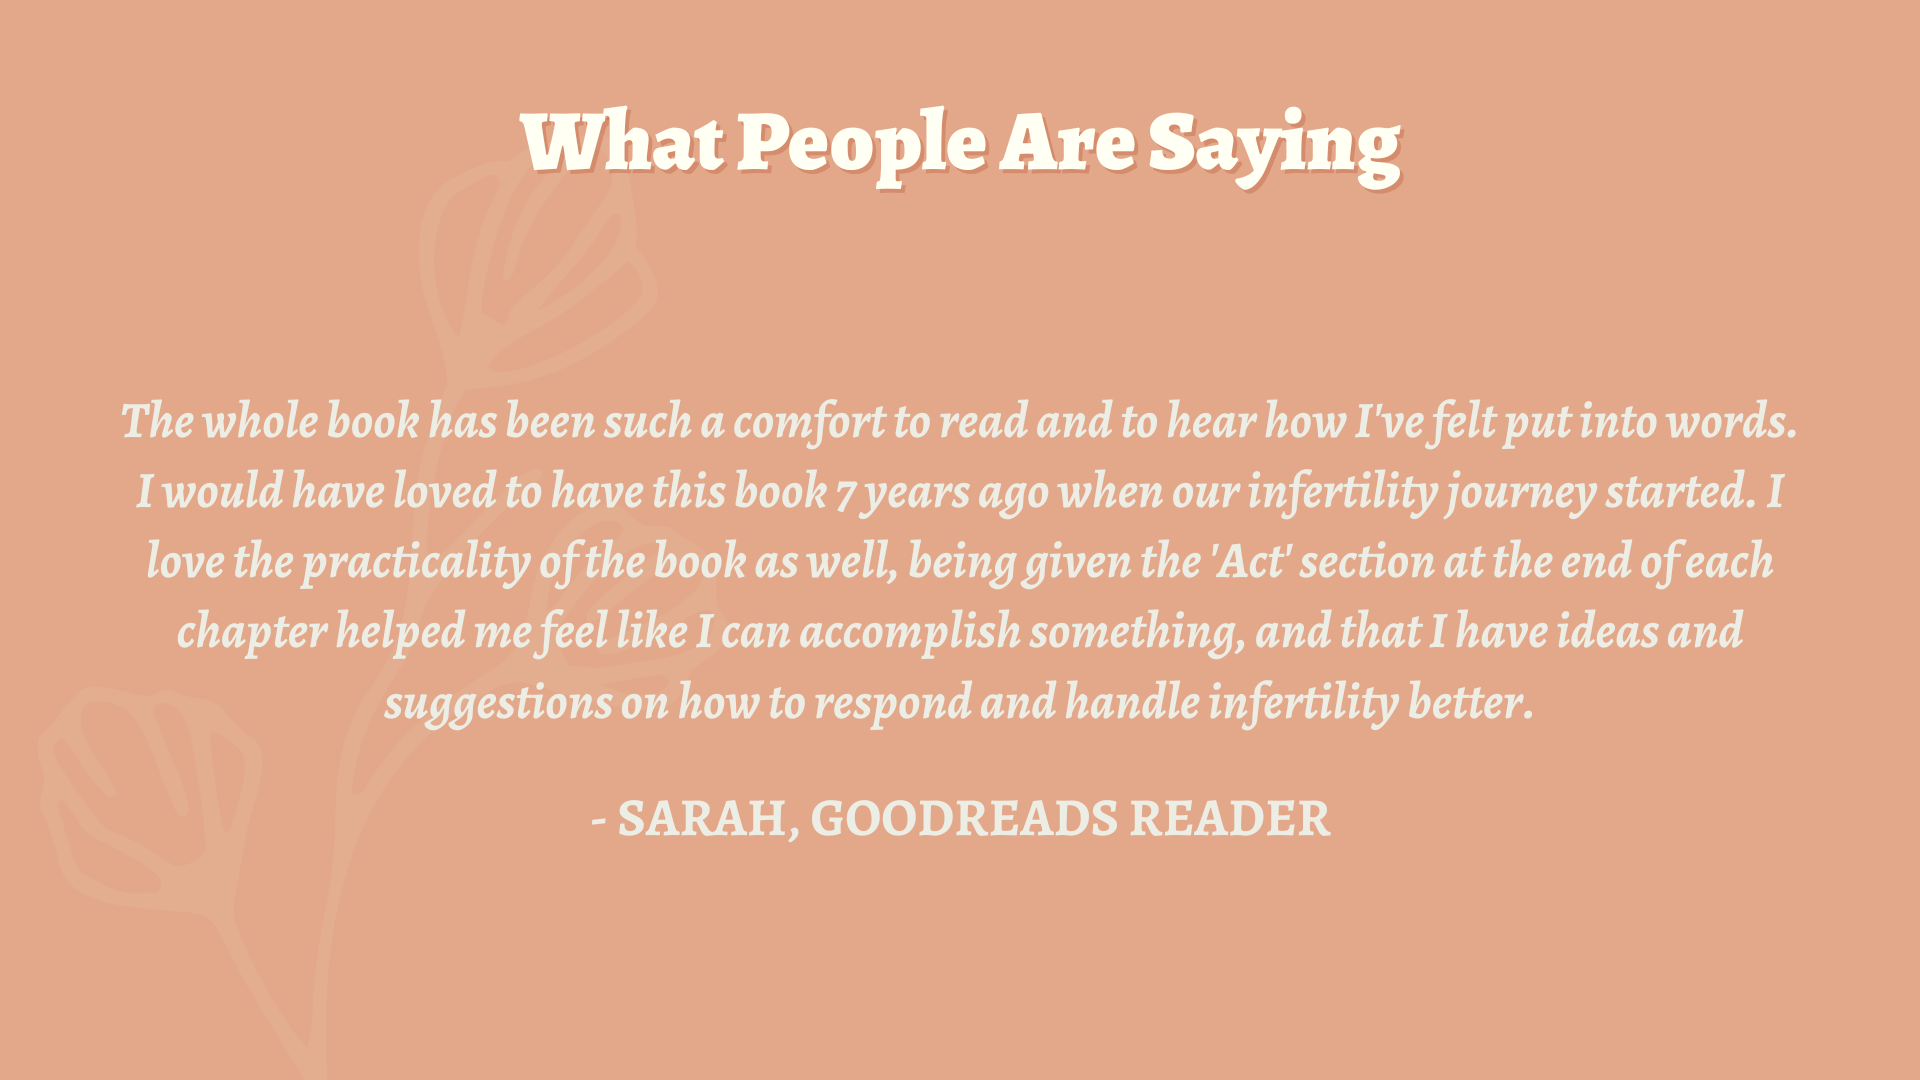 Reviews landing page goodreads 3 v2 (1).png